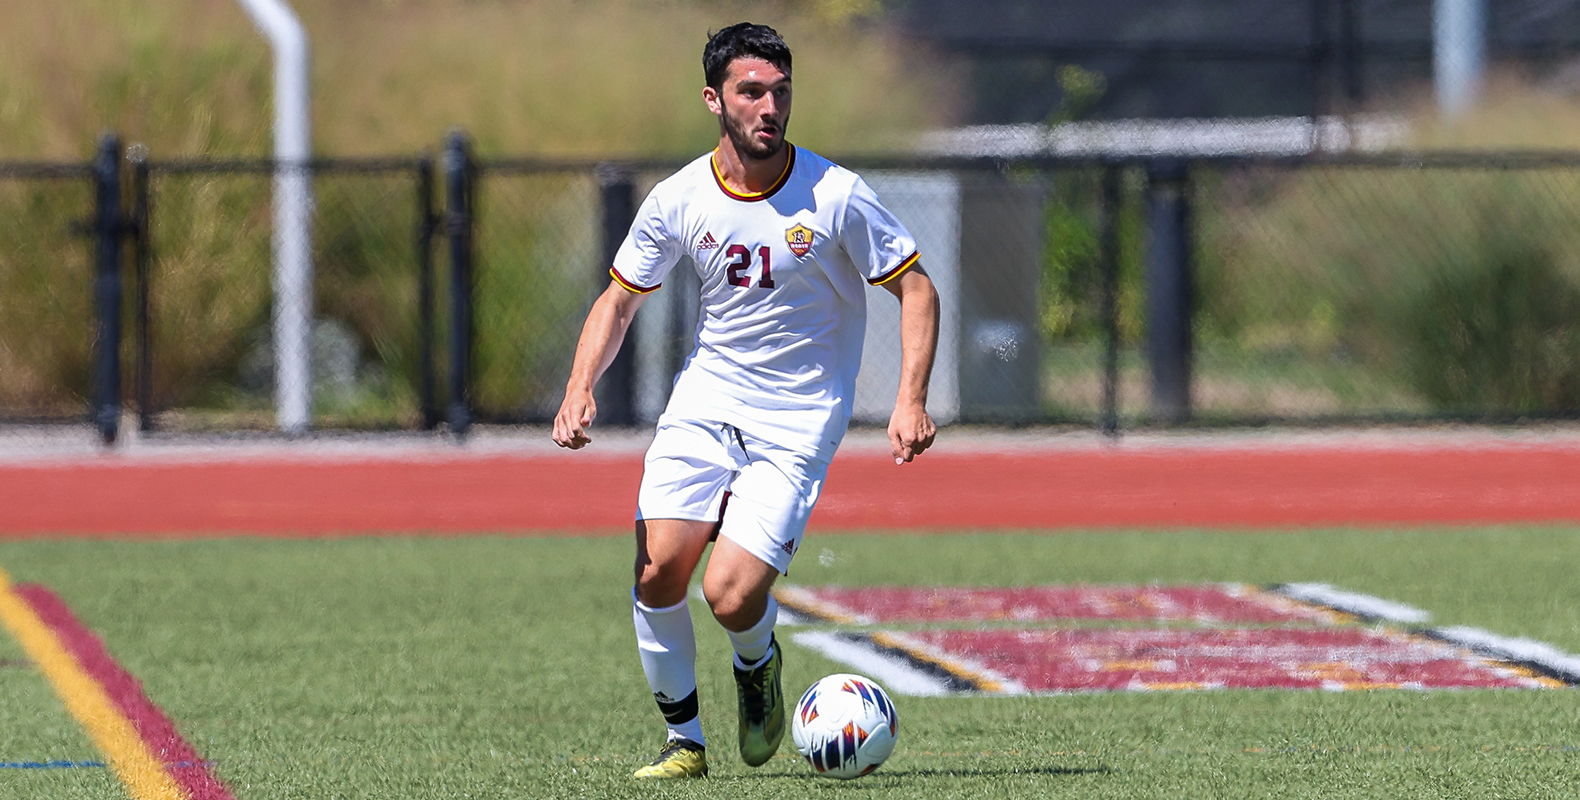 Men’s Soccer Loses Fast-Paced Contest Against Lasell